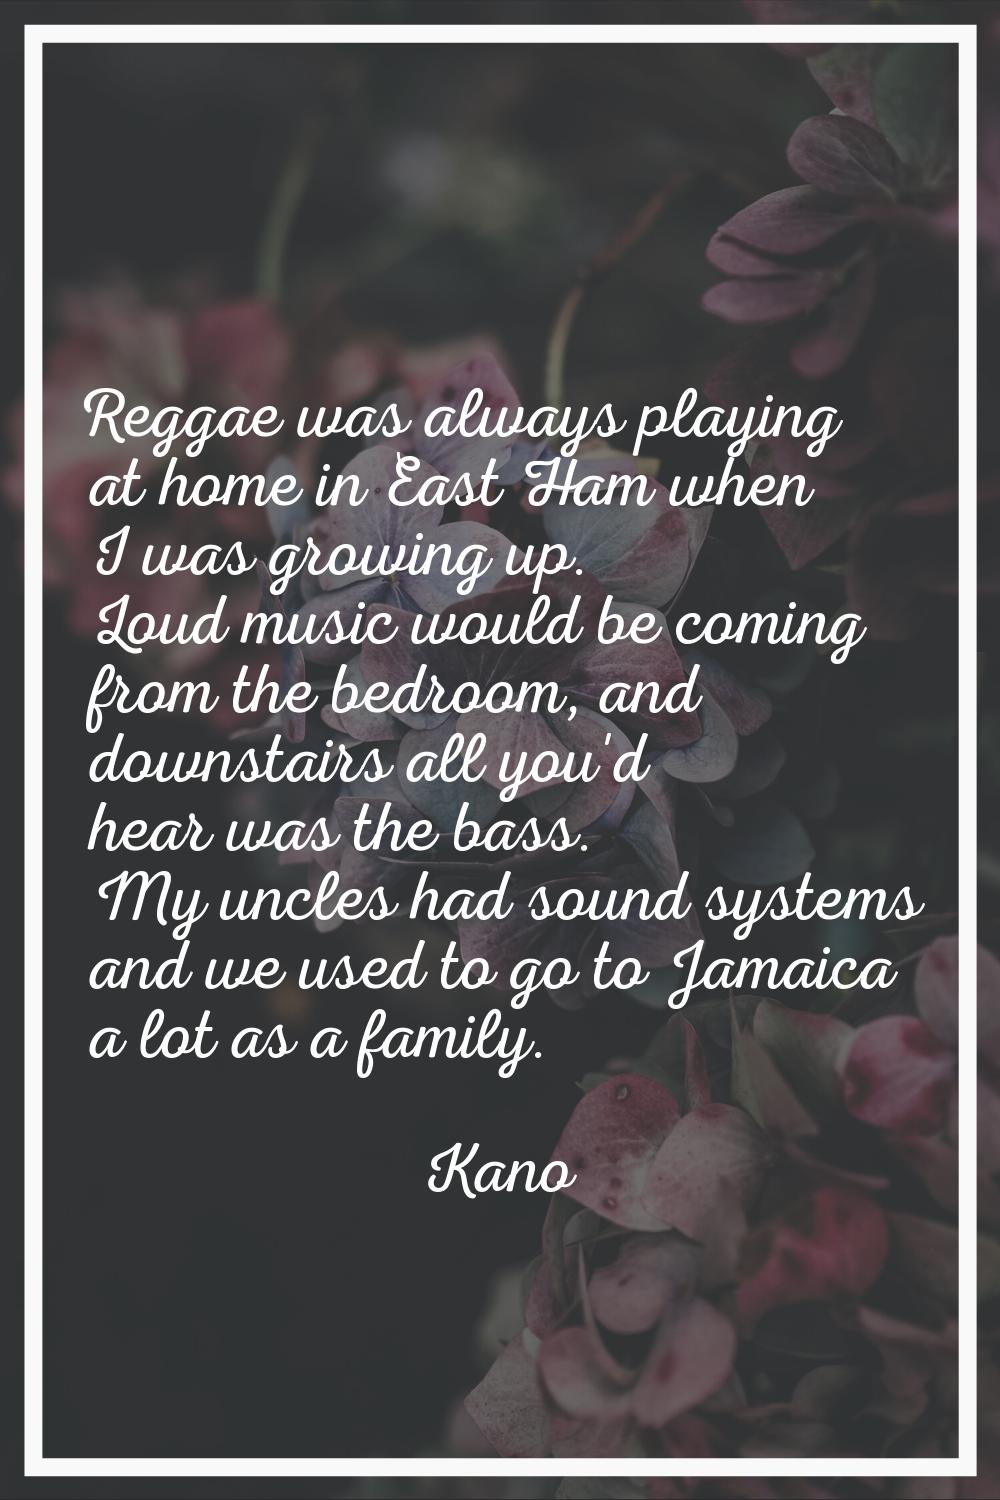 Reggae was always playing at home in East Ham when I was growing up. Loud music would be coming fro